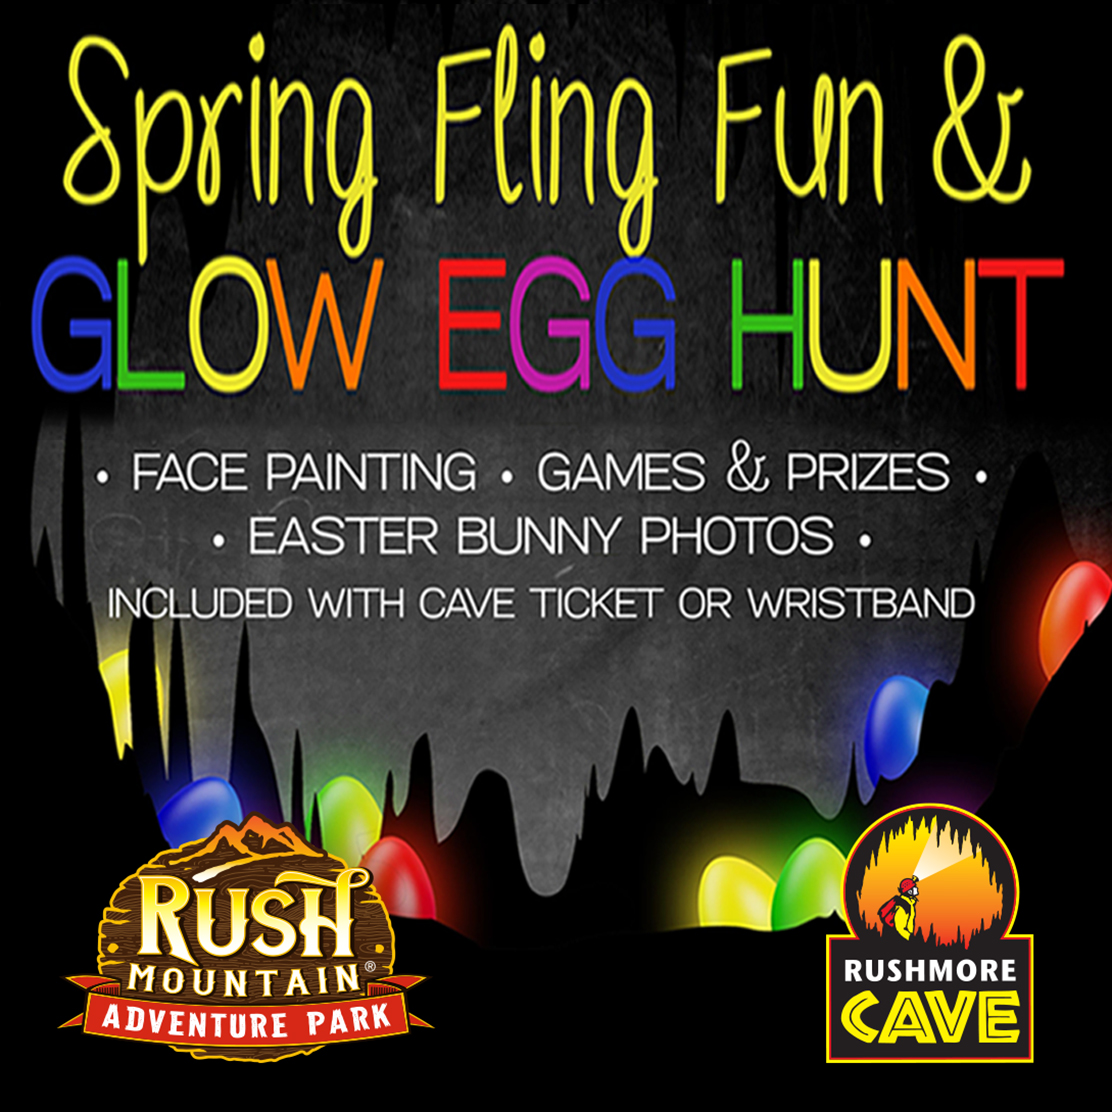 Glowing Easter eggs inside a cave with information on the Spring Fling and Glow Egg Hunt